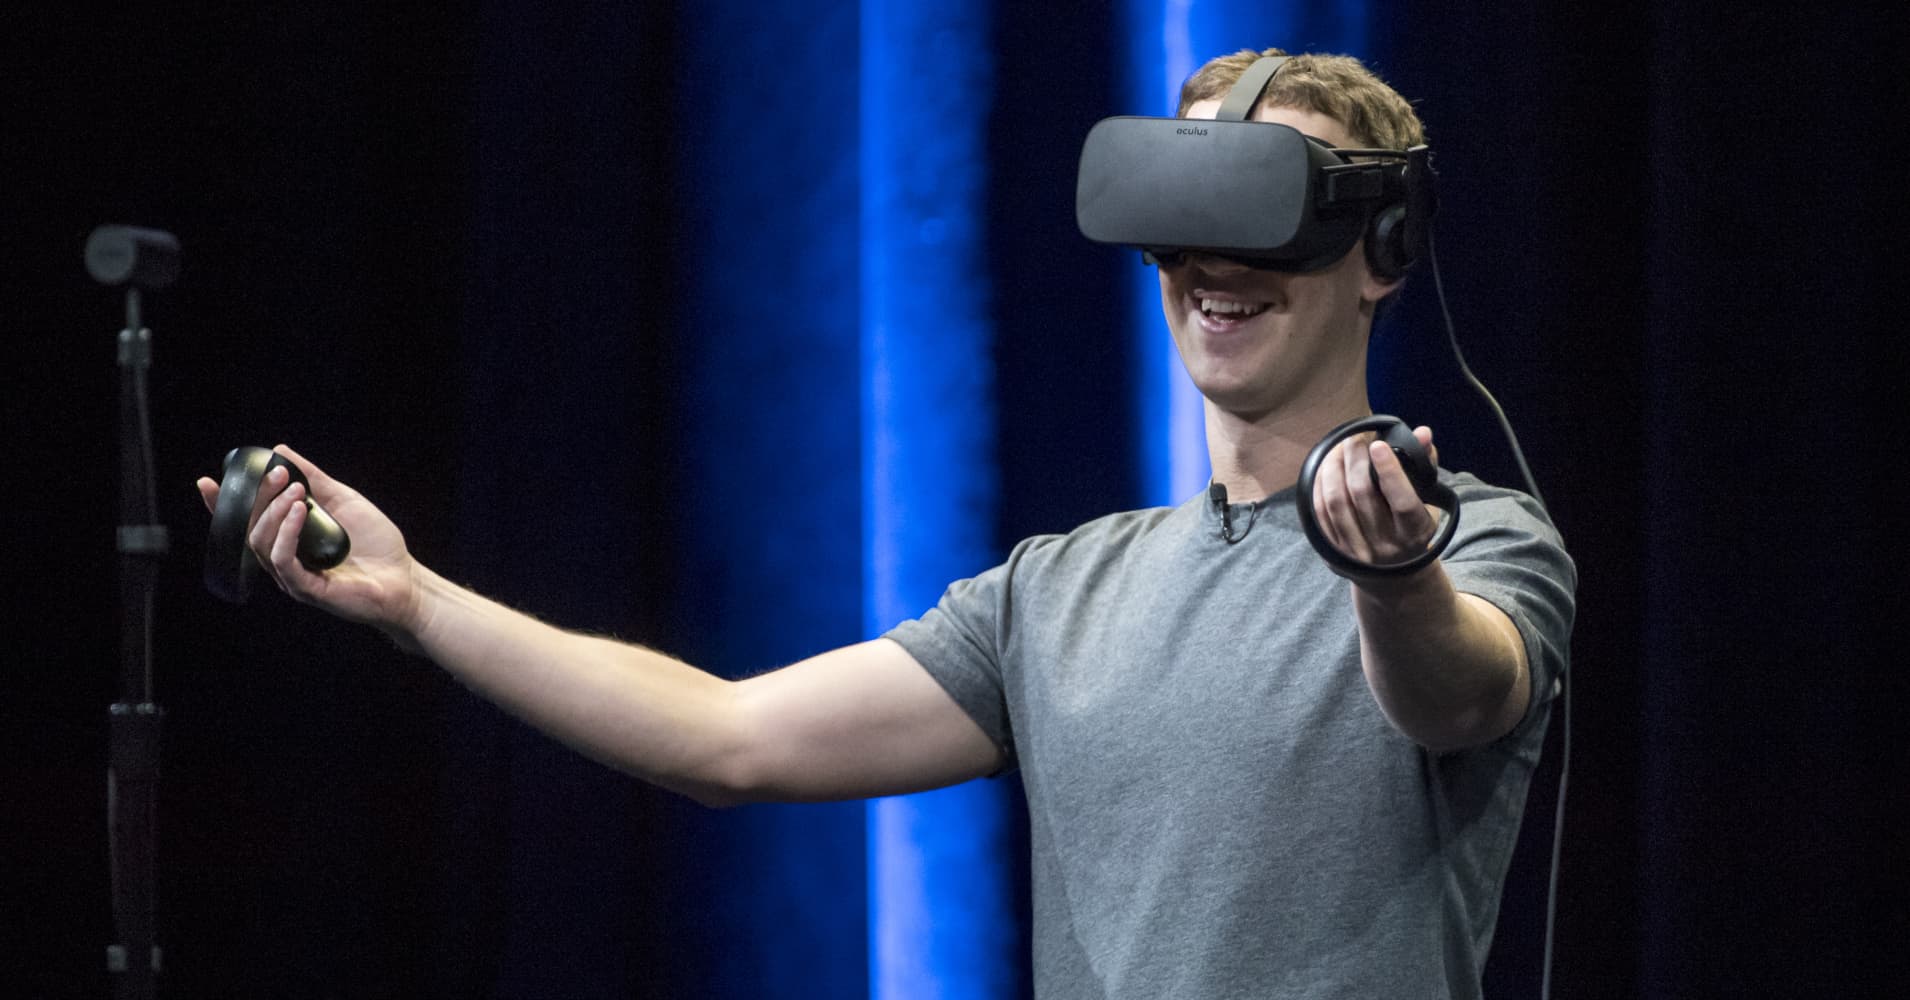 Facebook is investing at least $10 billion in its metaverse division